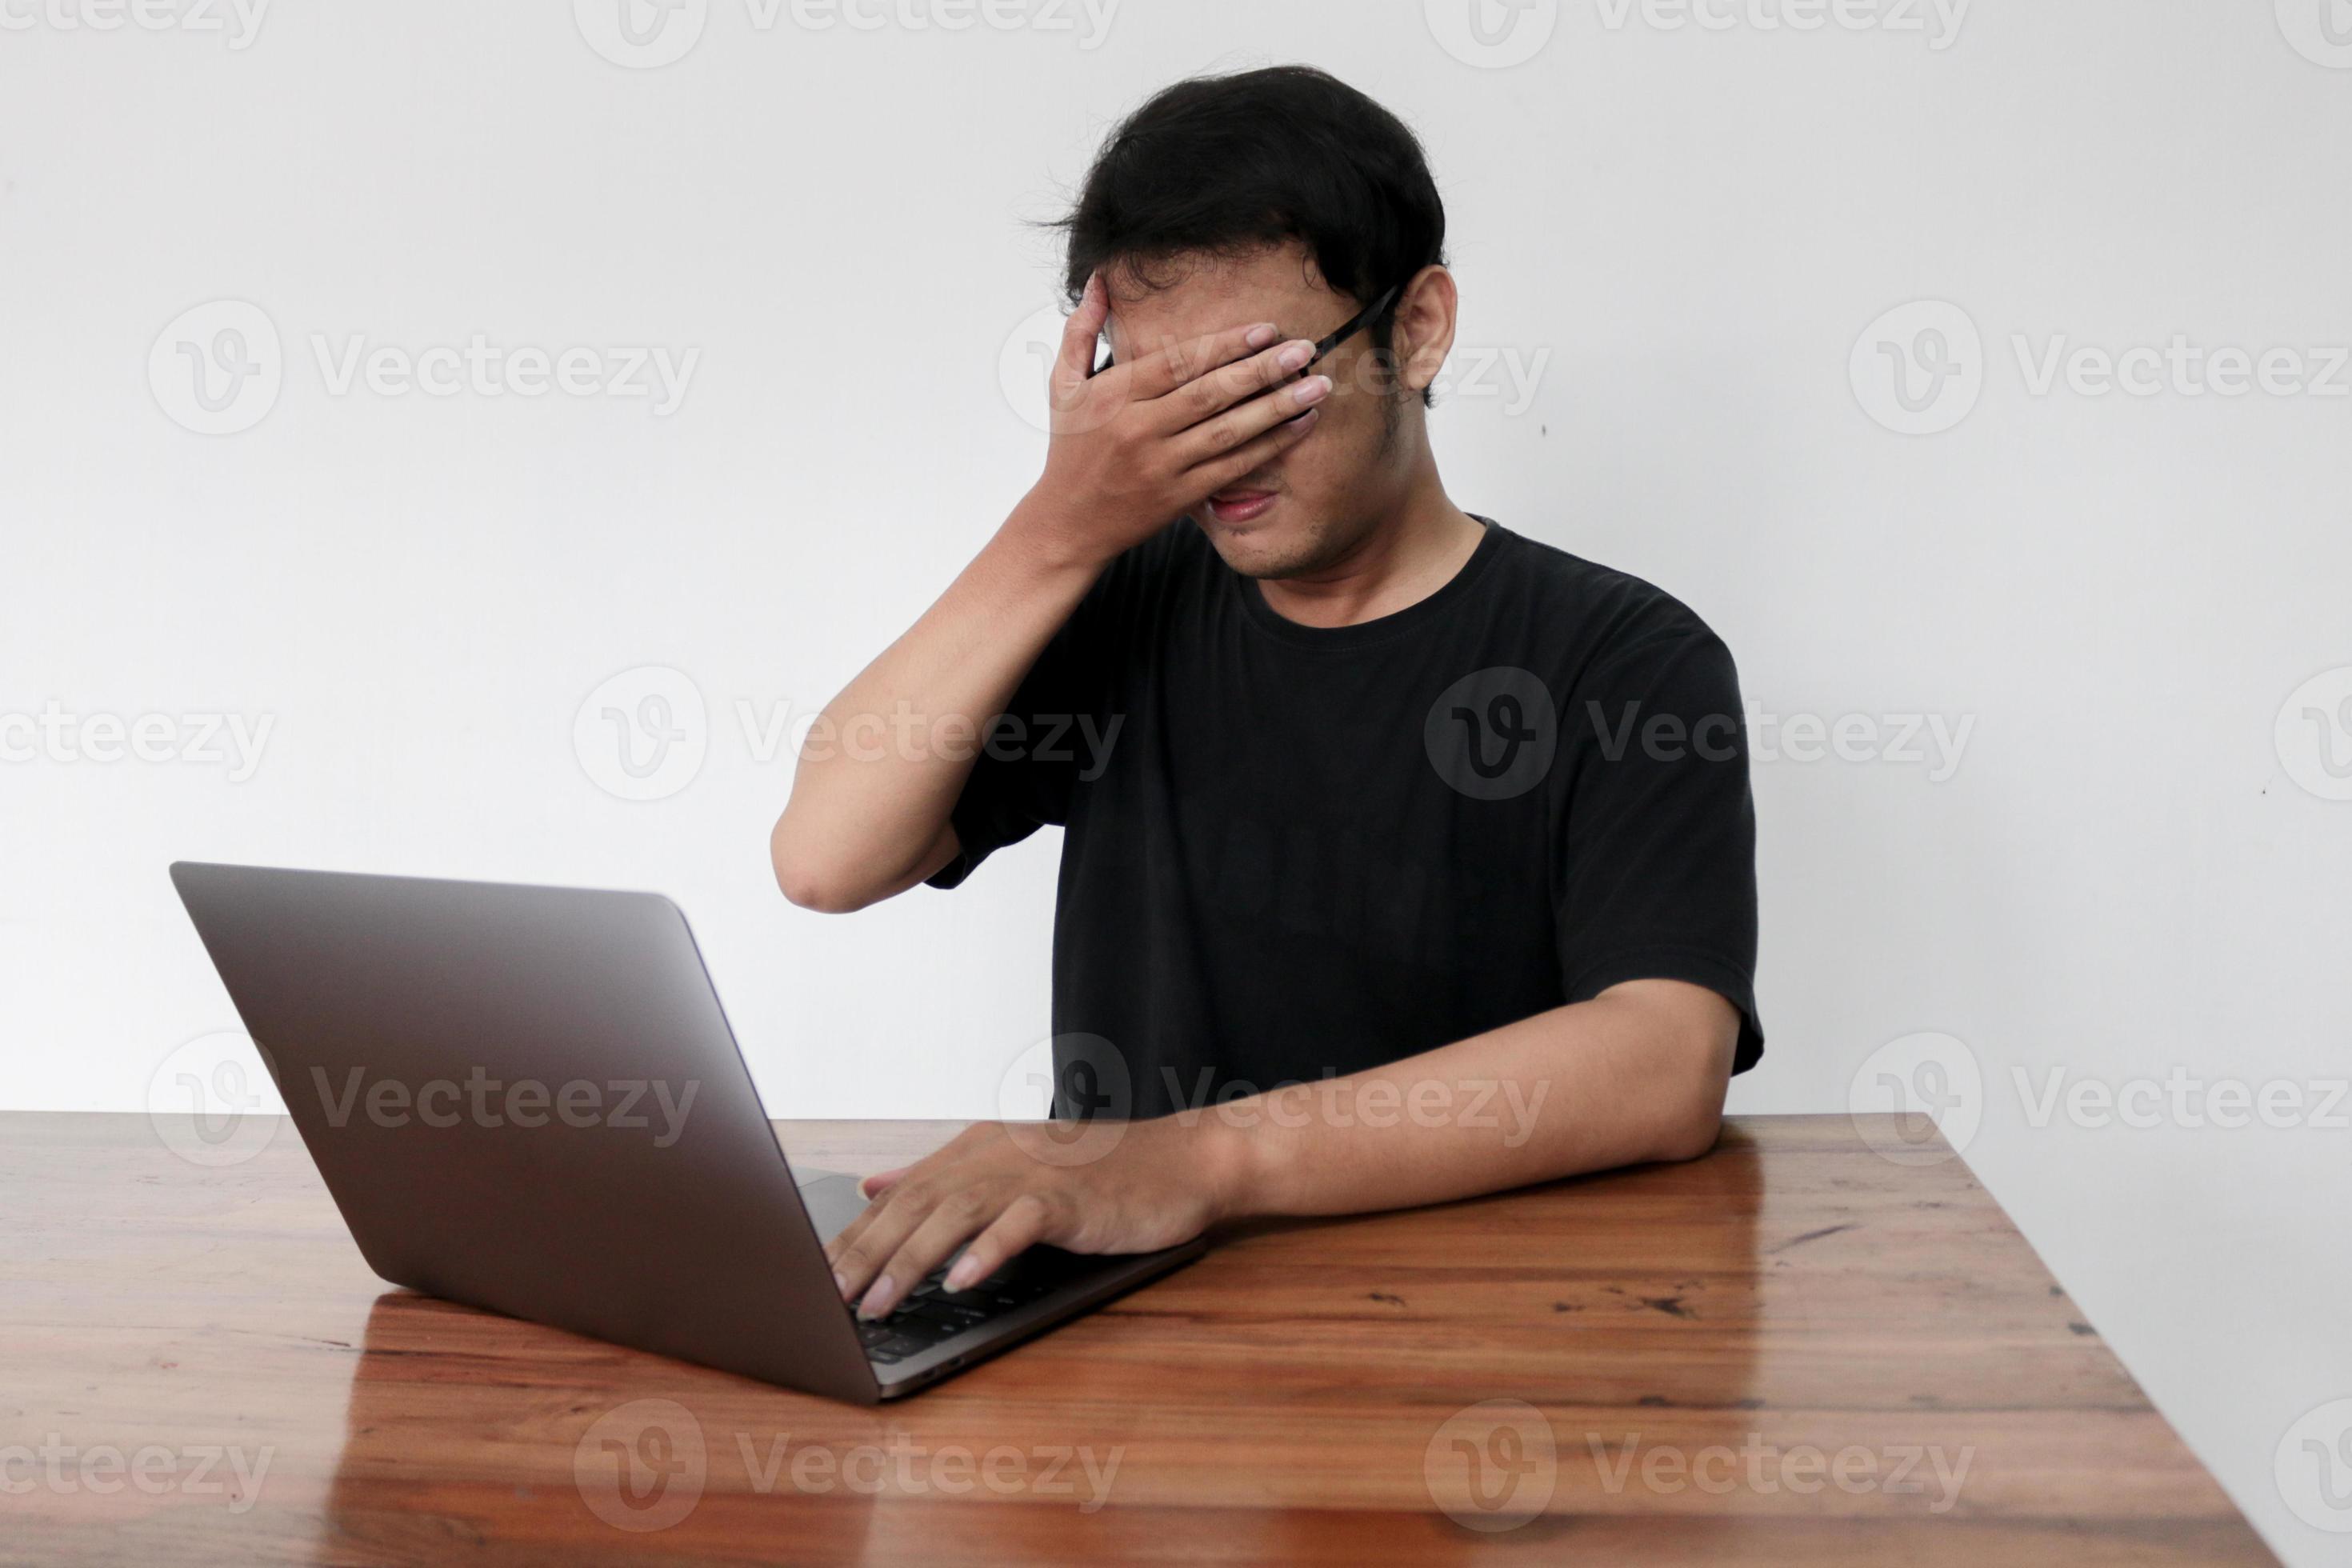 Forbidden Asian Porn - Young asian man hiding his face with hand because shocked and embarrassed  by some porn videos or another forbidden thing he saw on the internet using  a laptop 5714633 Stock Photo at